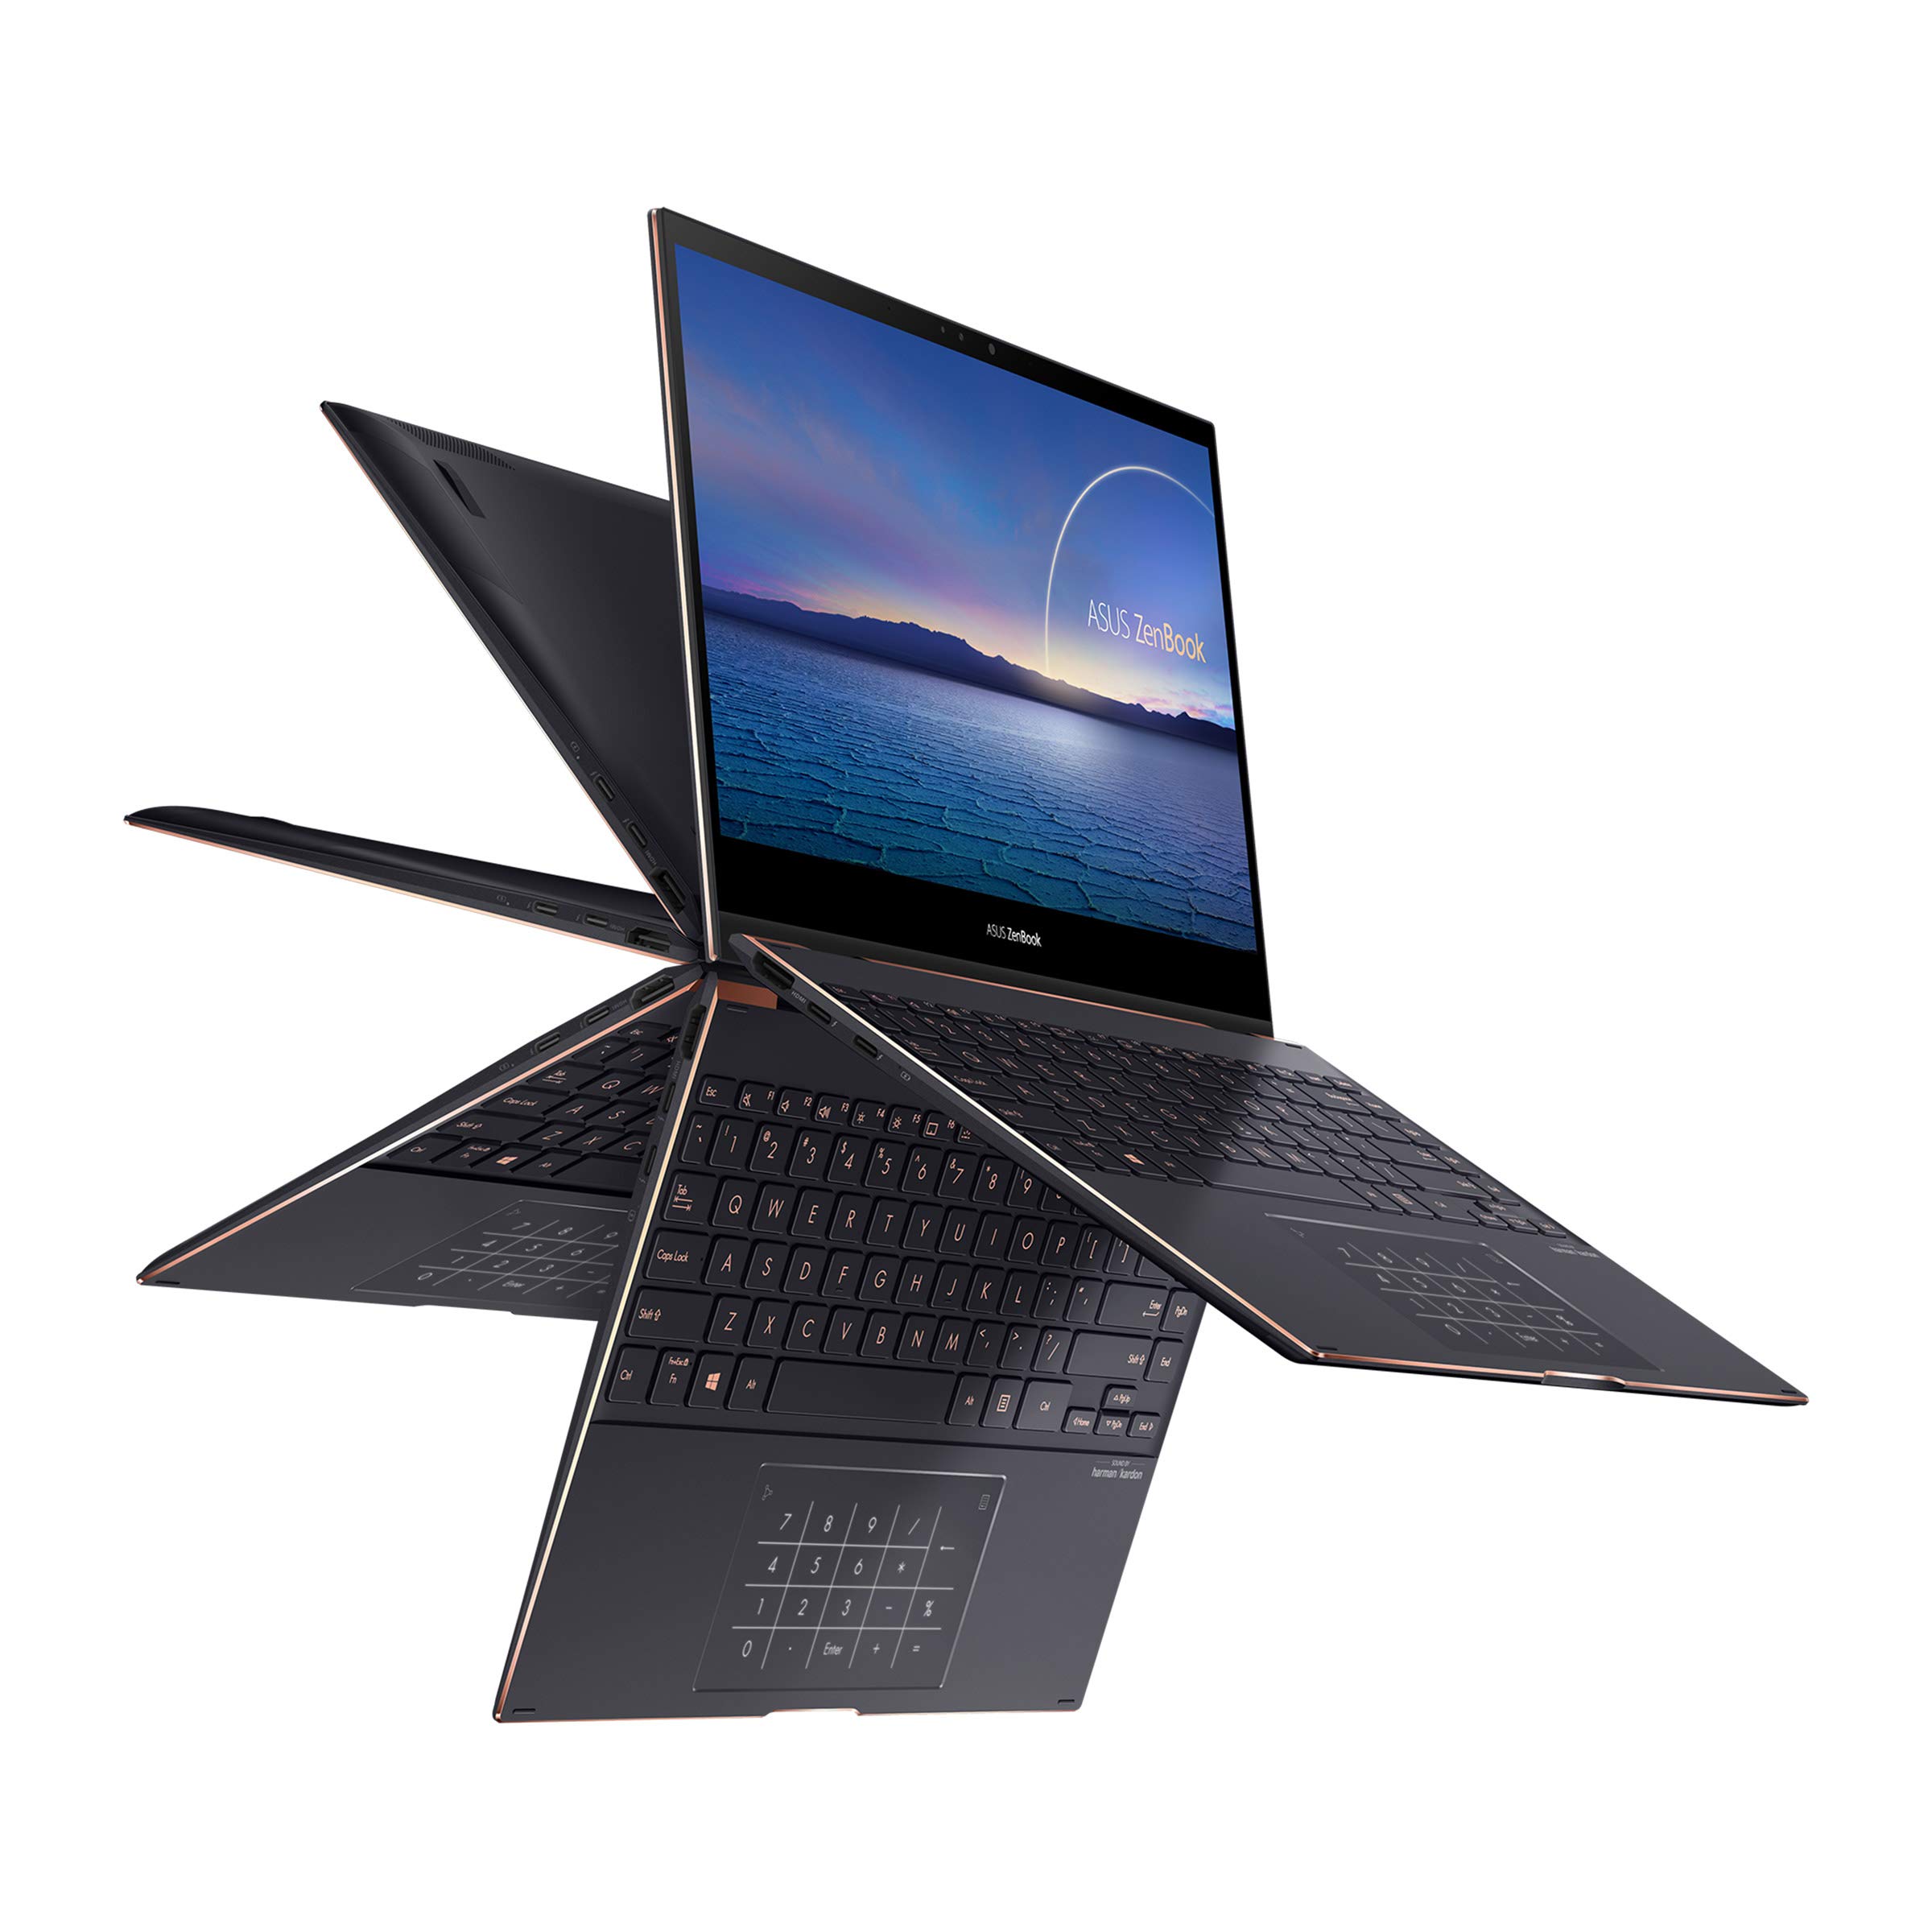 New ZenBook Flip S Ultra Slim Laptop UX371EA-XH77T 13.3 inches 4K OLED Touch Display 11TH Gen i7-1165G7 Iris Xe Thunderbolt 4 Windows Hello Active Pen, Best Notebooks Stylus Pen (2TB SSD|16GB Ram|10 Pro), 13-13.99 inches